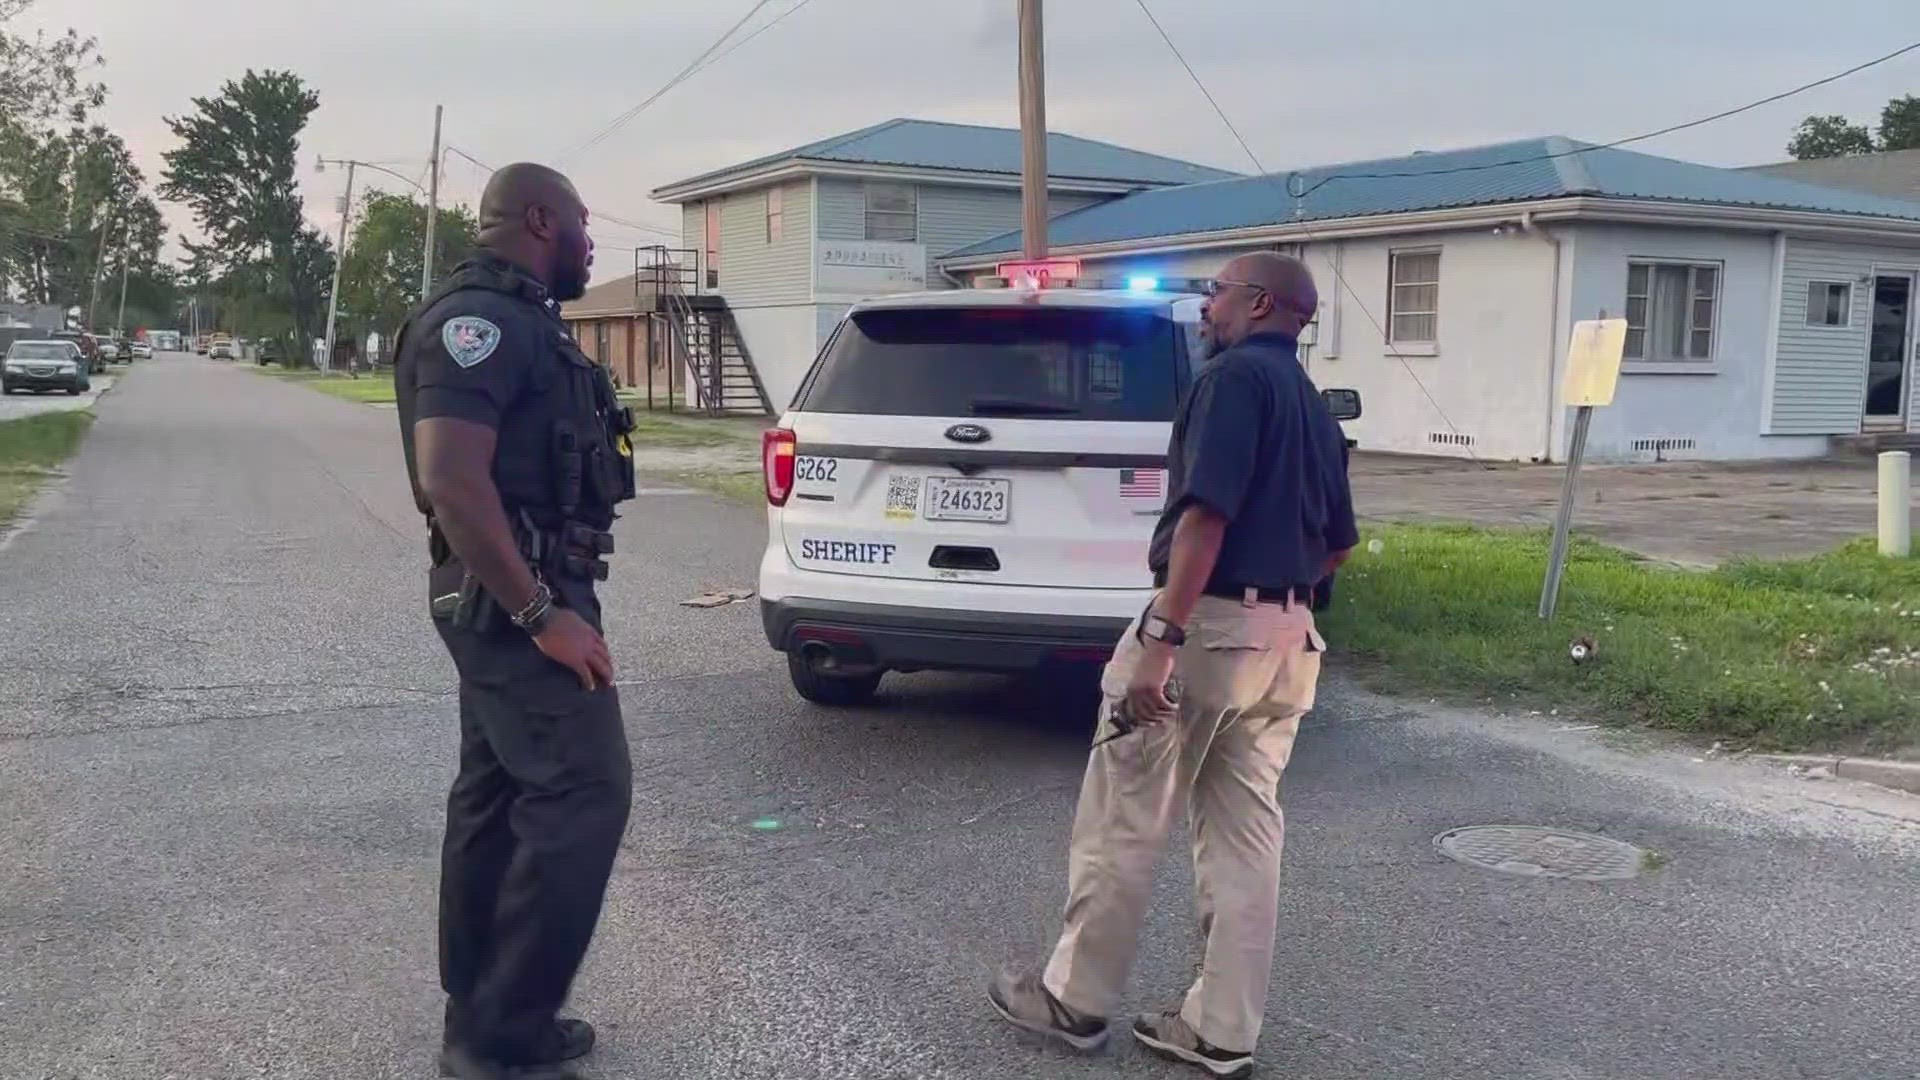 According to JPSO, the shooting comes after an investigation into 4 armed robberies and burglaries where 50-year-old Louis Alexander was developed as a suspect.